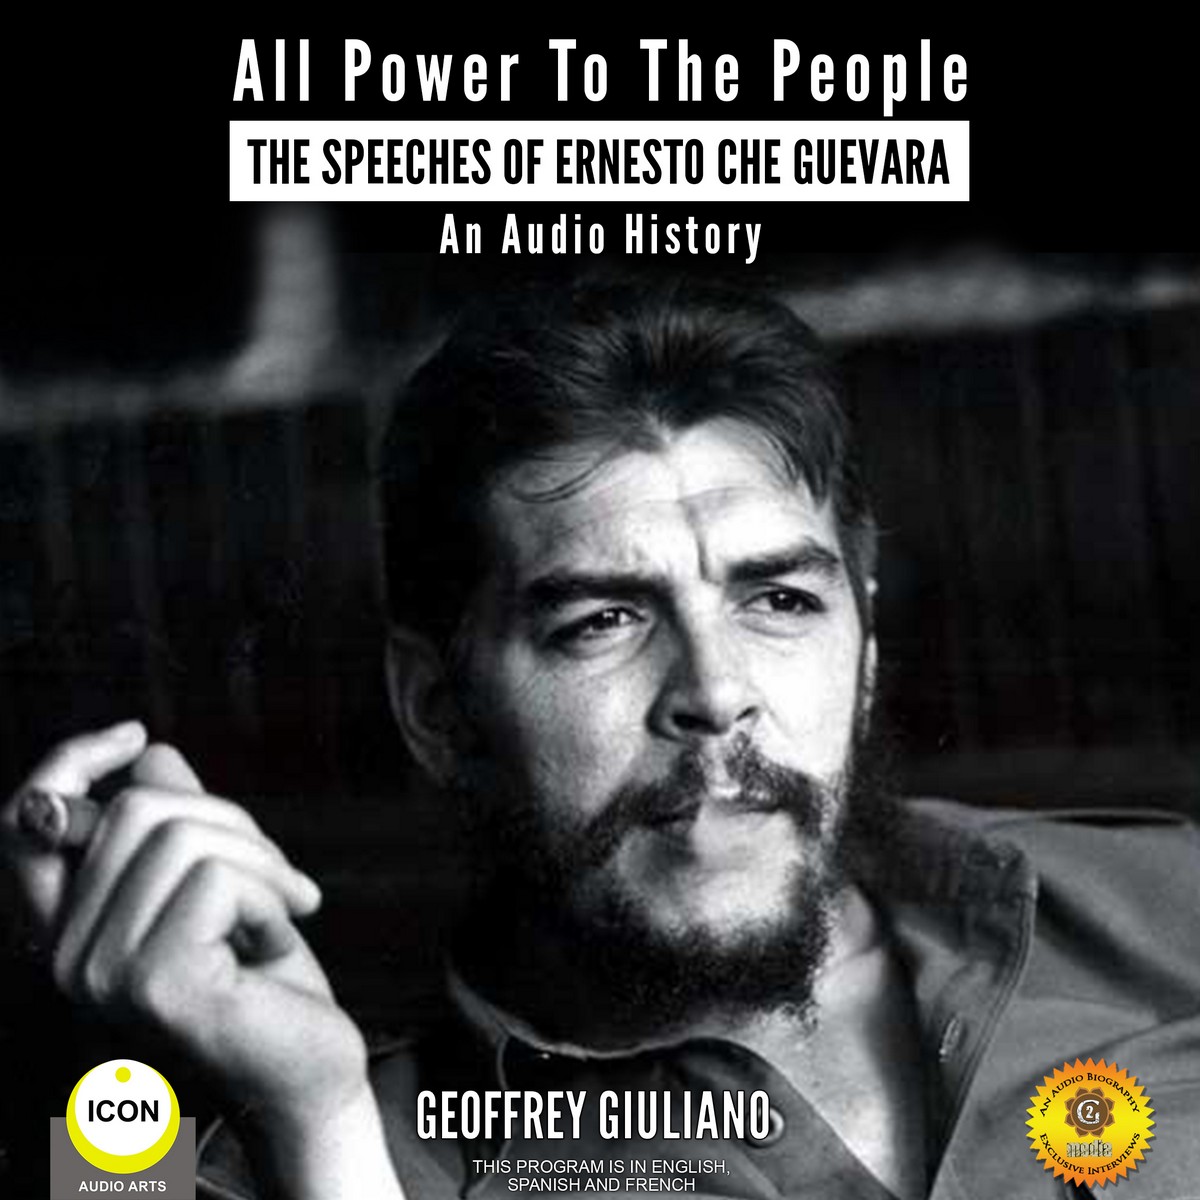 All Power to the People – The Speeches of Ernesto Che Guevara